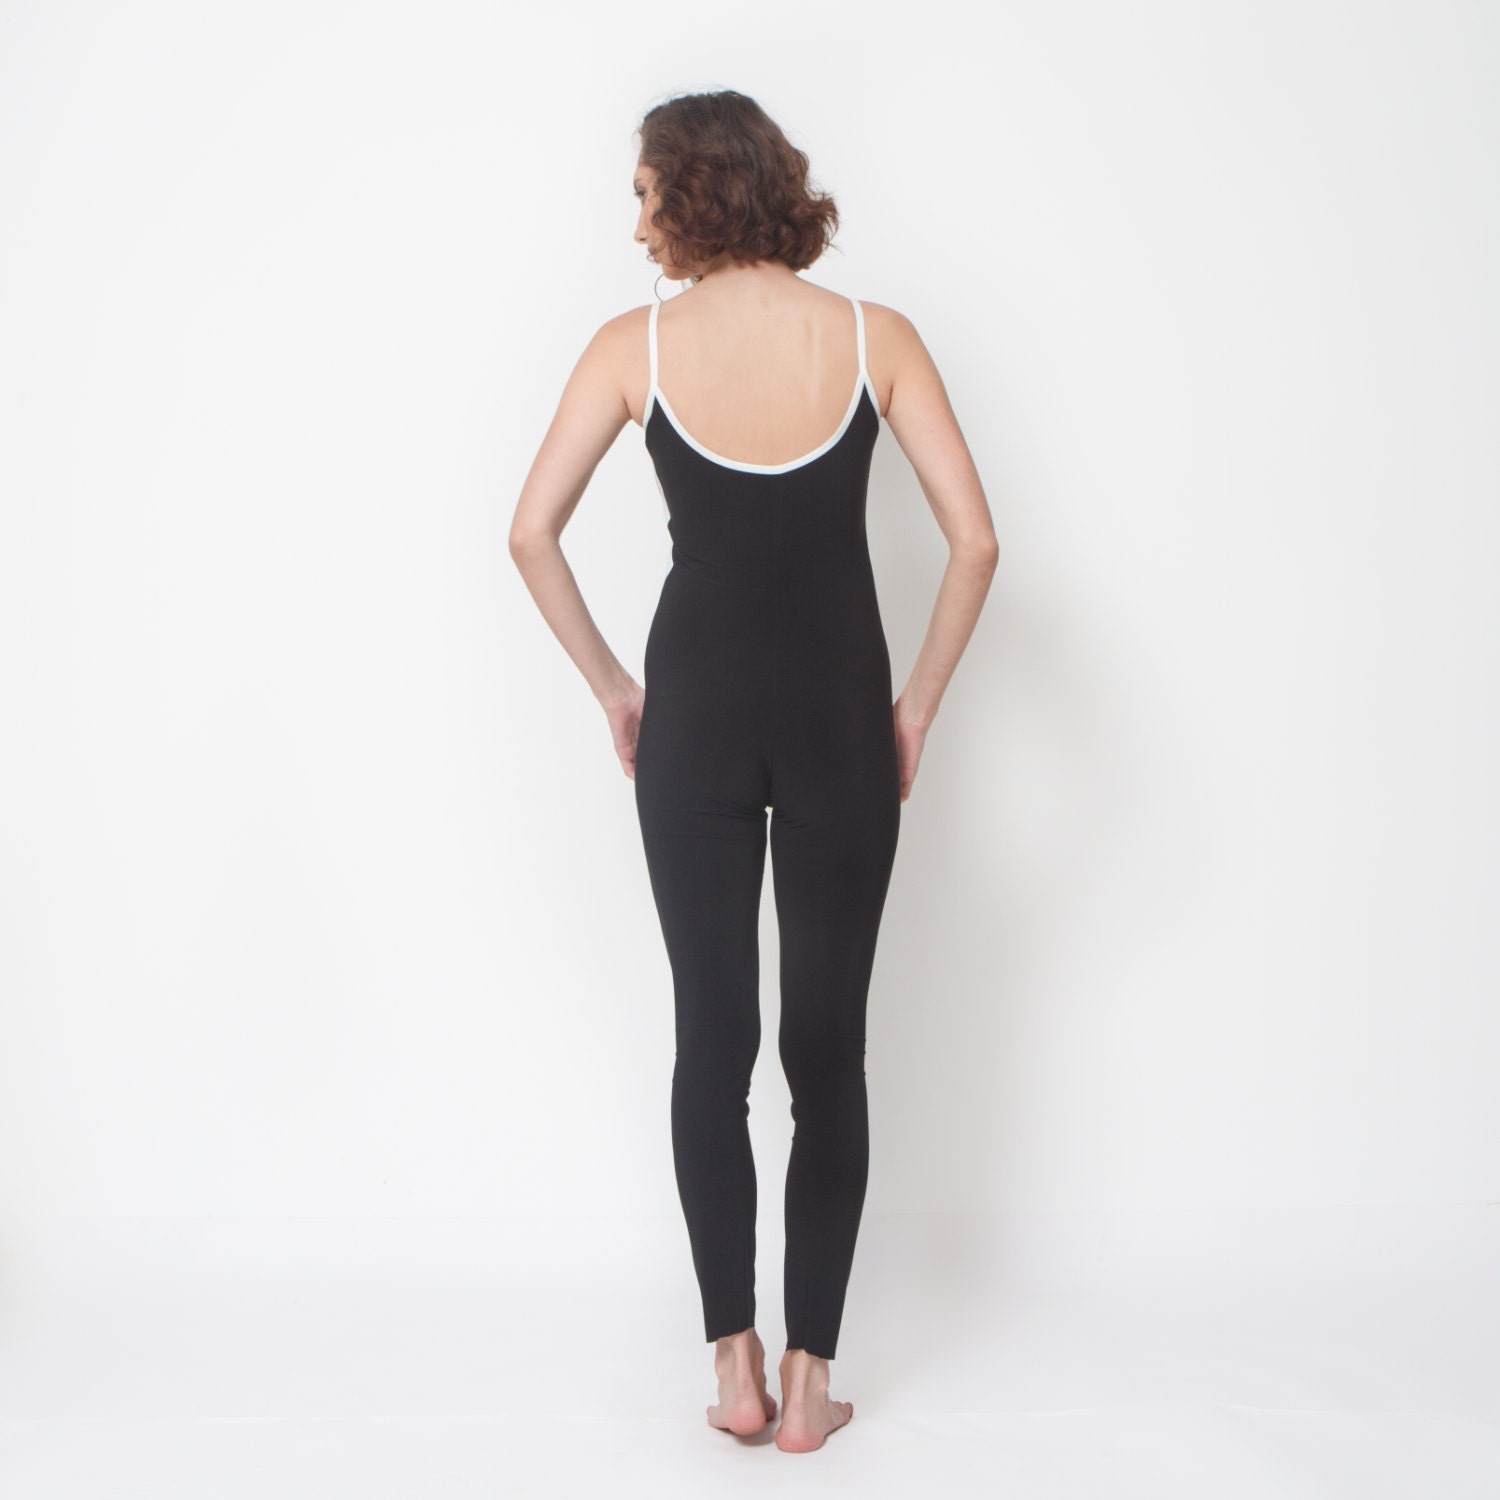 Workout Jumpsuit one piece perfect fit / Bodysuit / by ByGalit